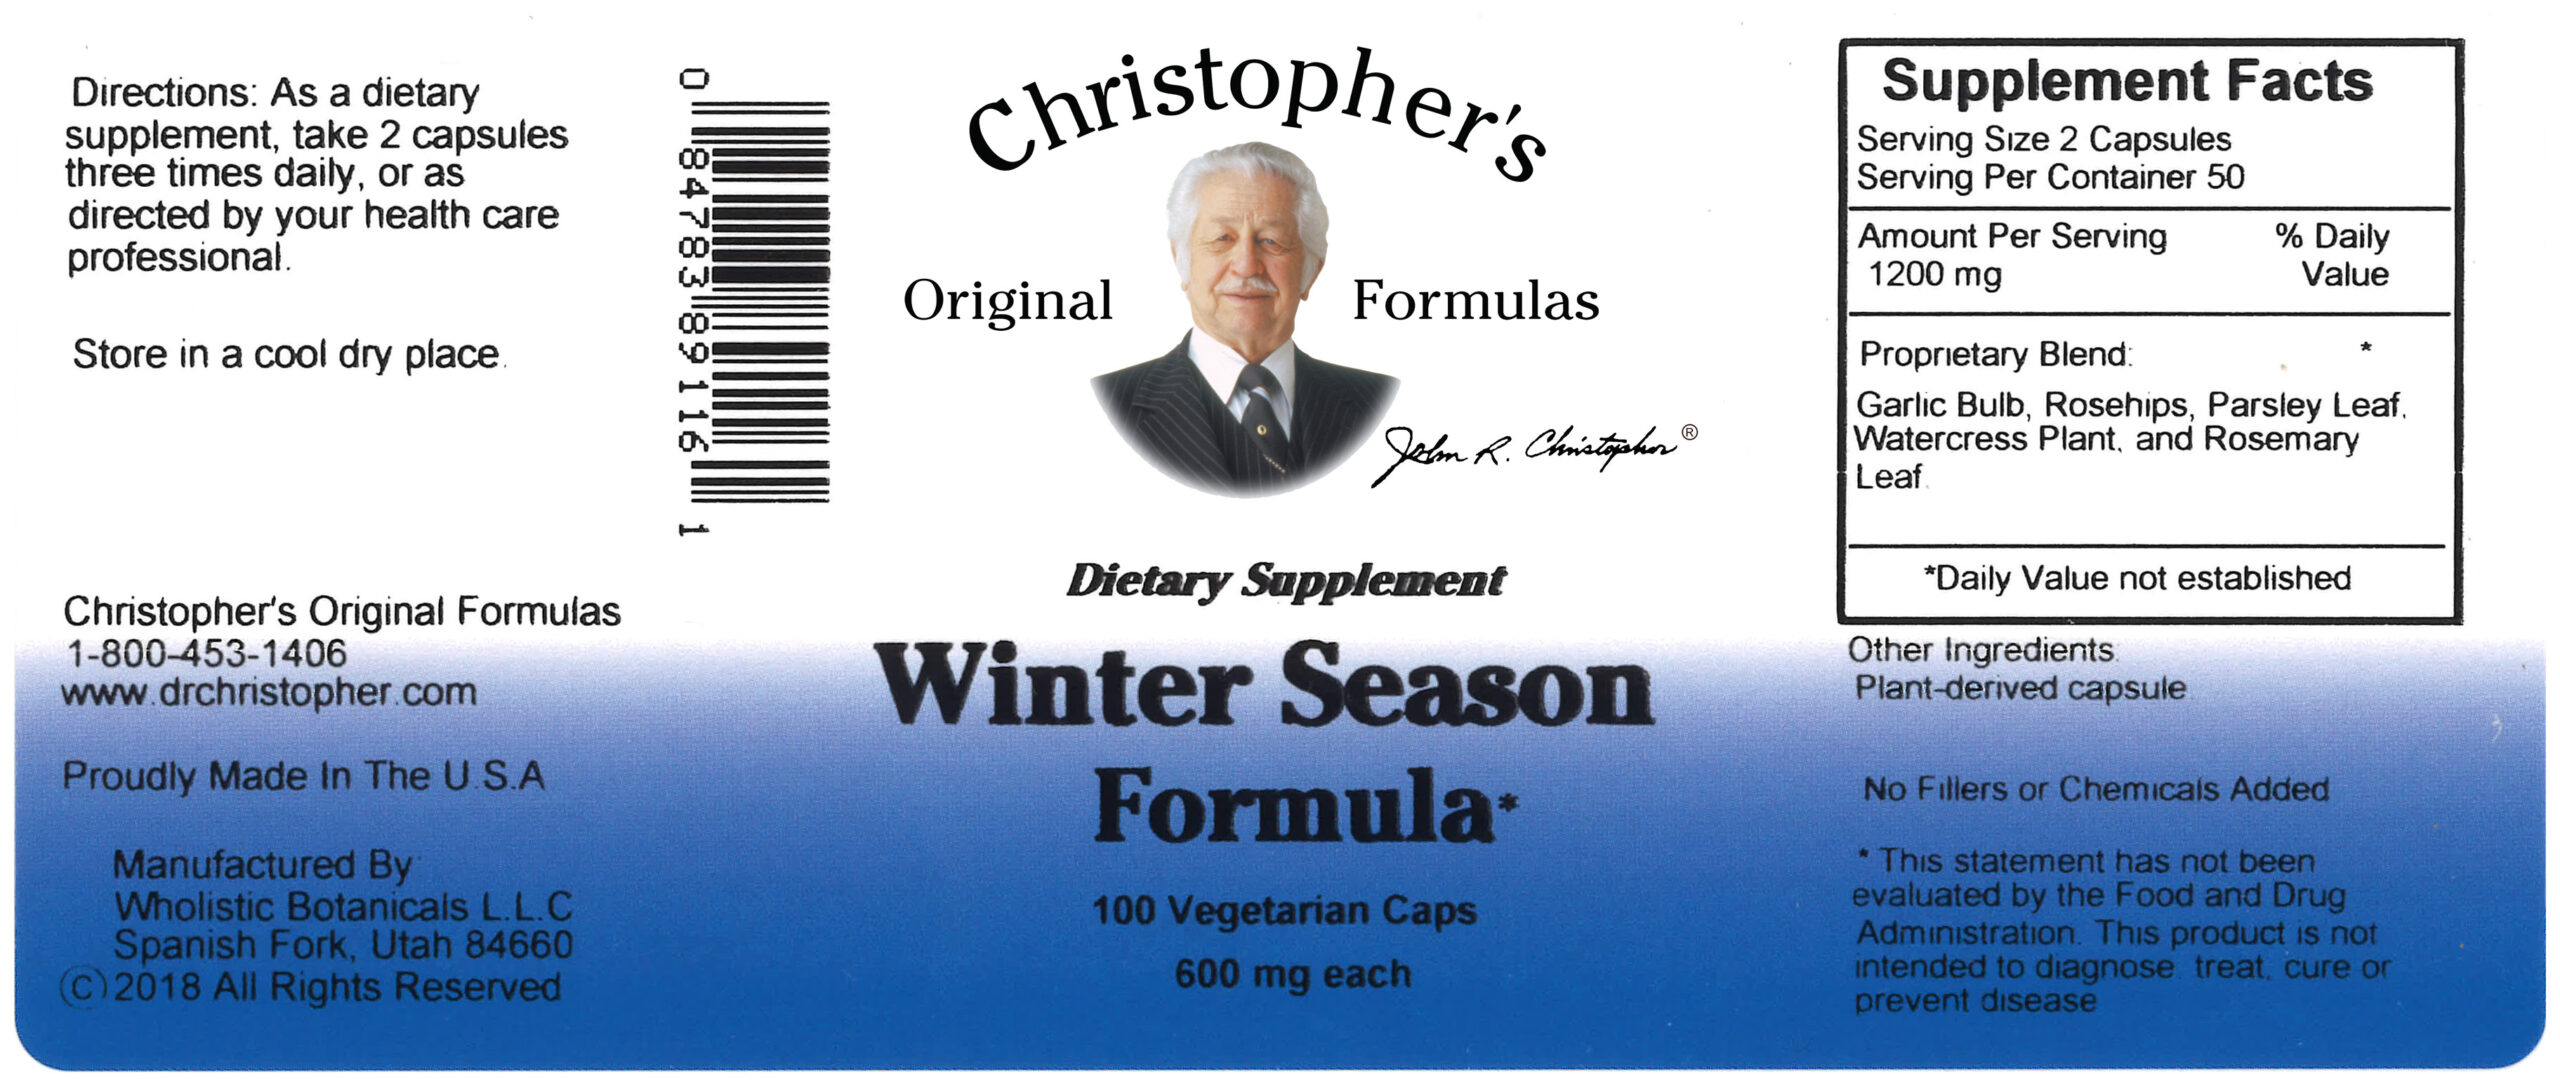 Dr Christophers Winter Season Supplement Facts